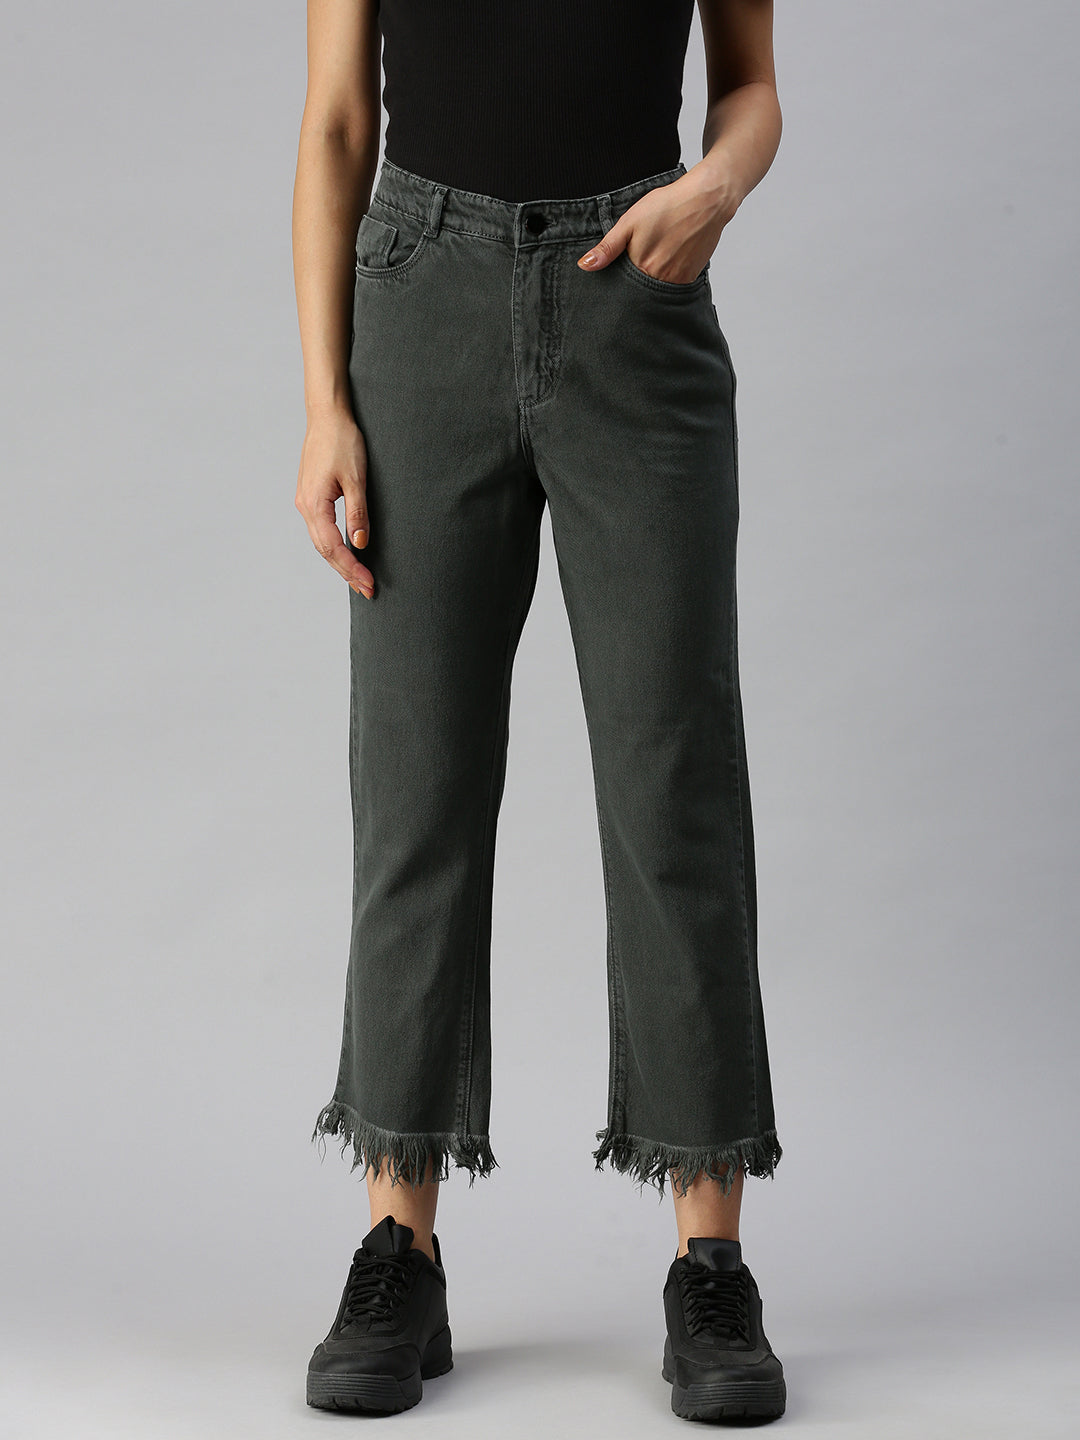 Women's Olive Solid Denim Relaxed Jeans